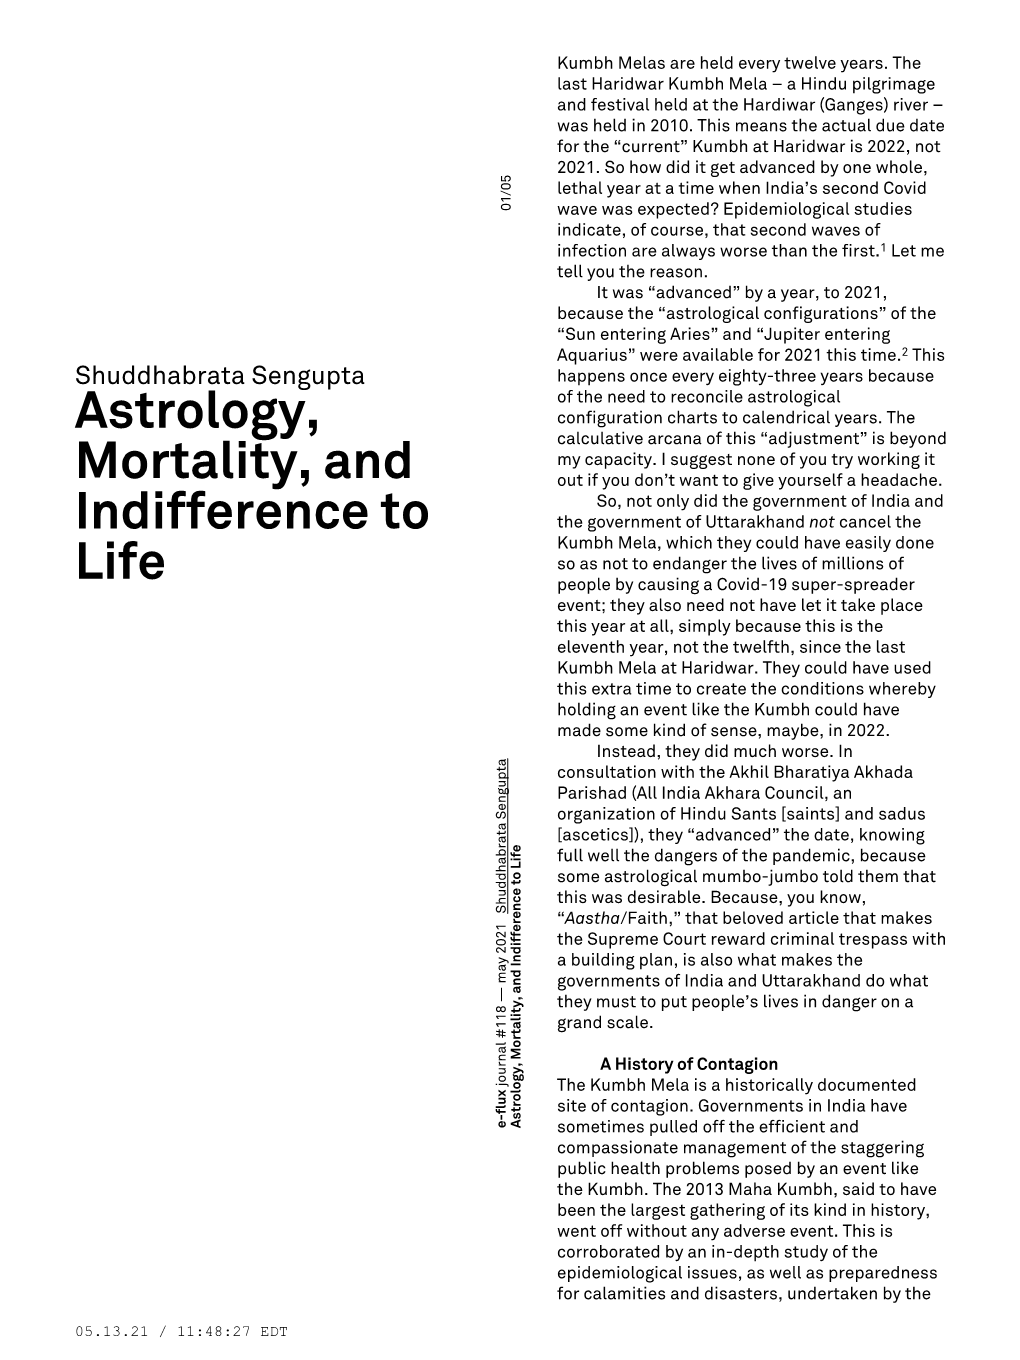 Astrology, Mortality, and Indifference to Life